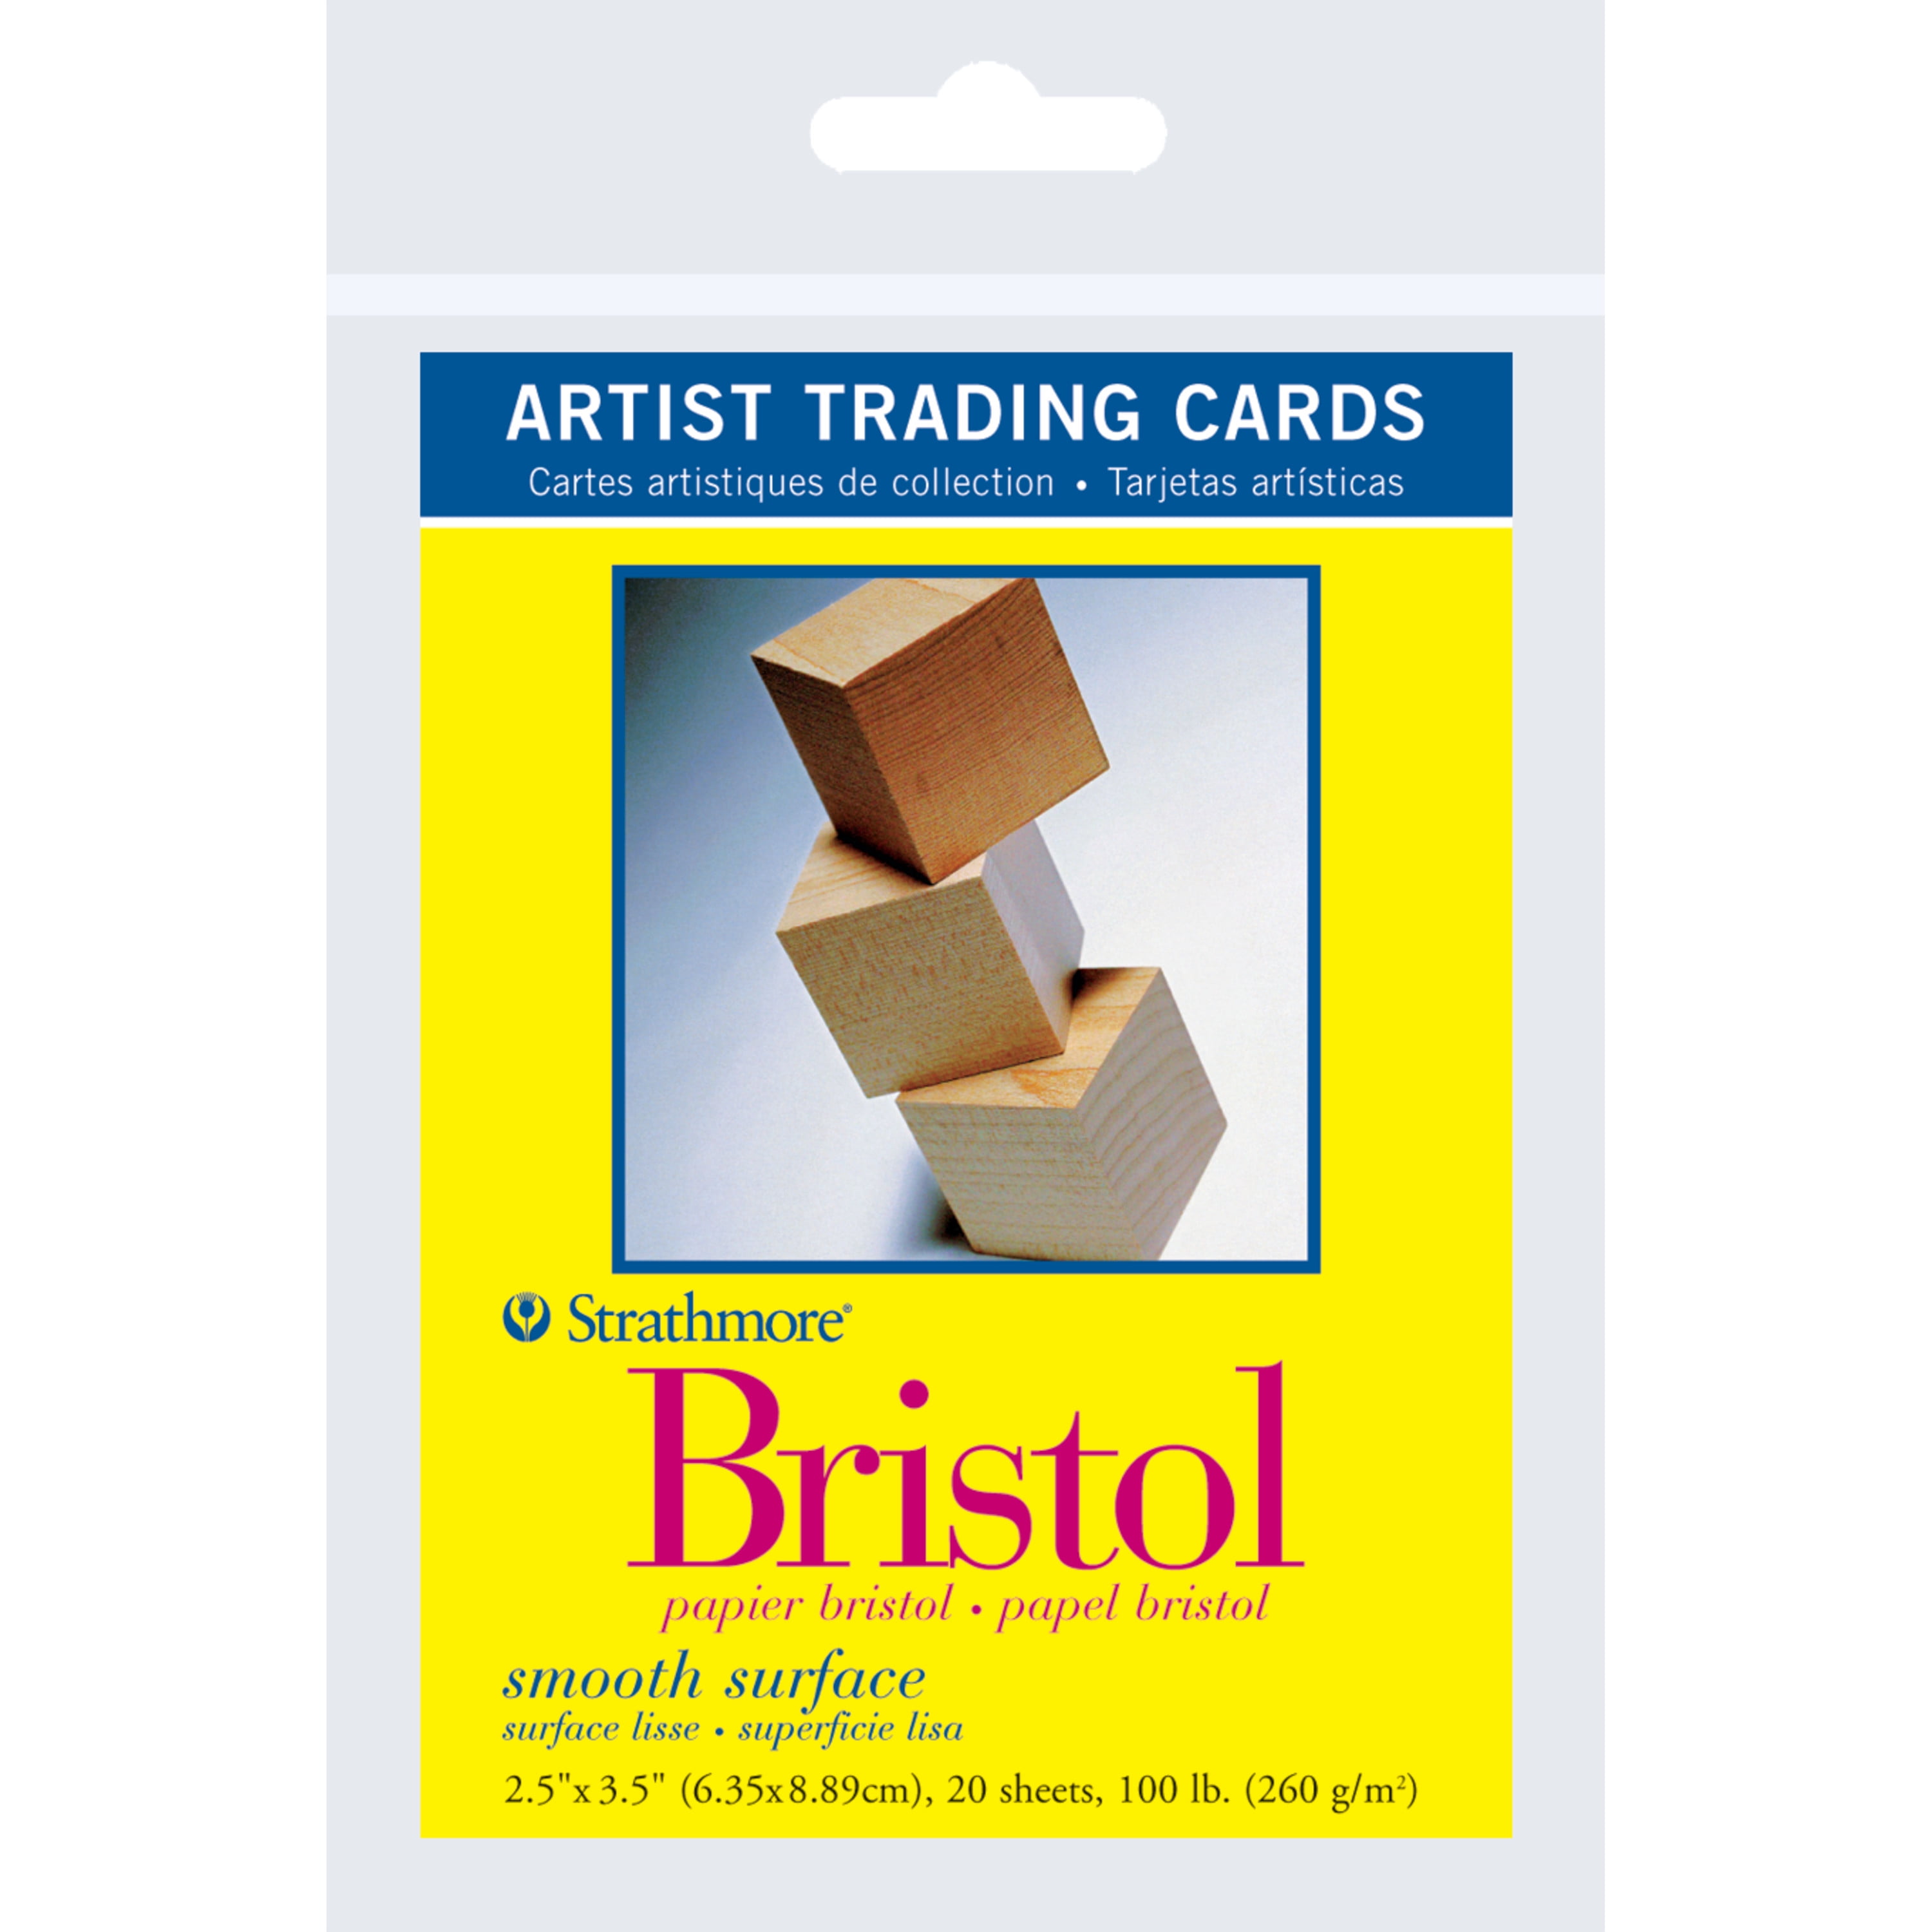 Artist Trading Cards: Strathmore Assorted Pack (review)